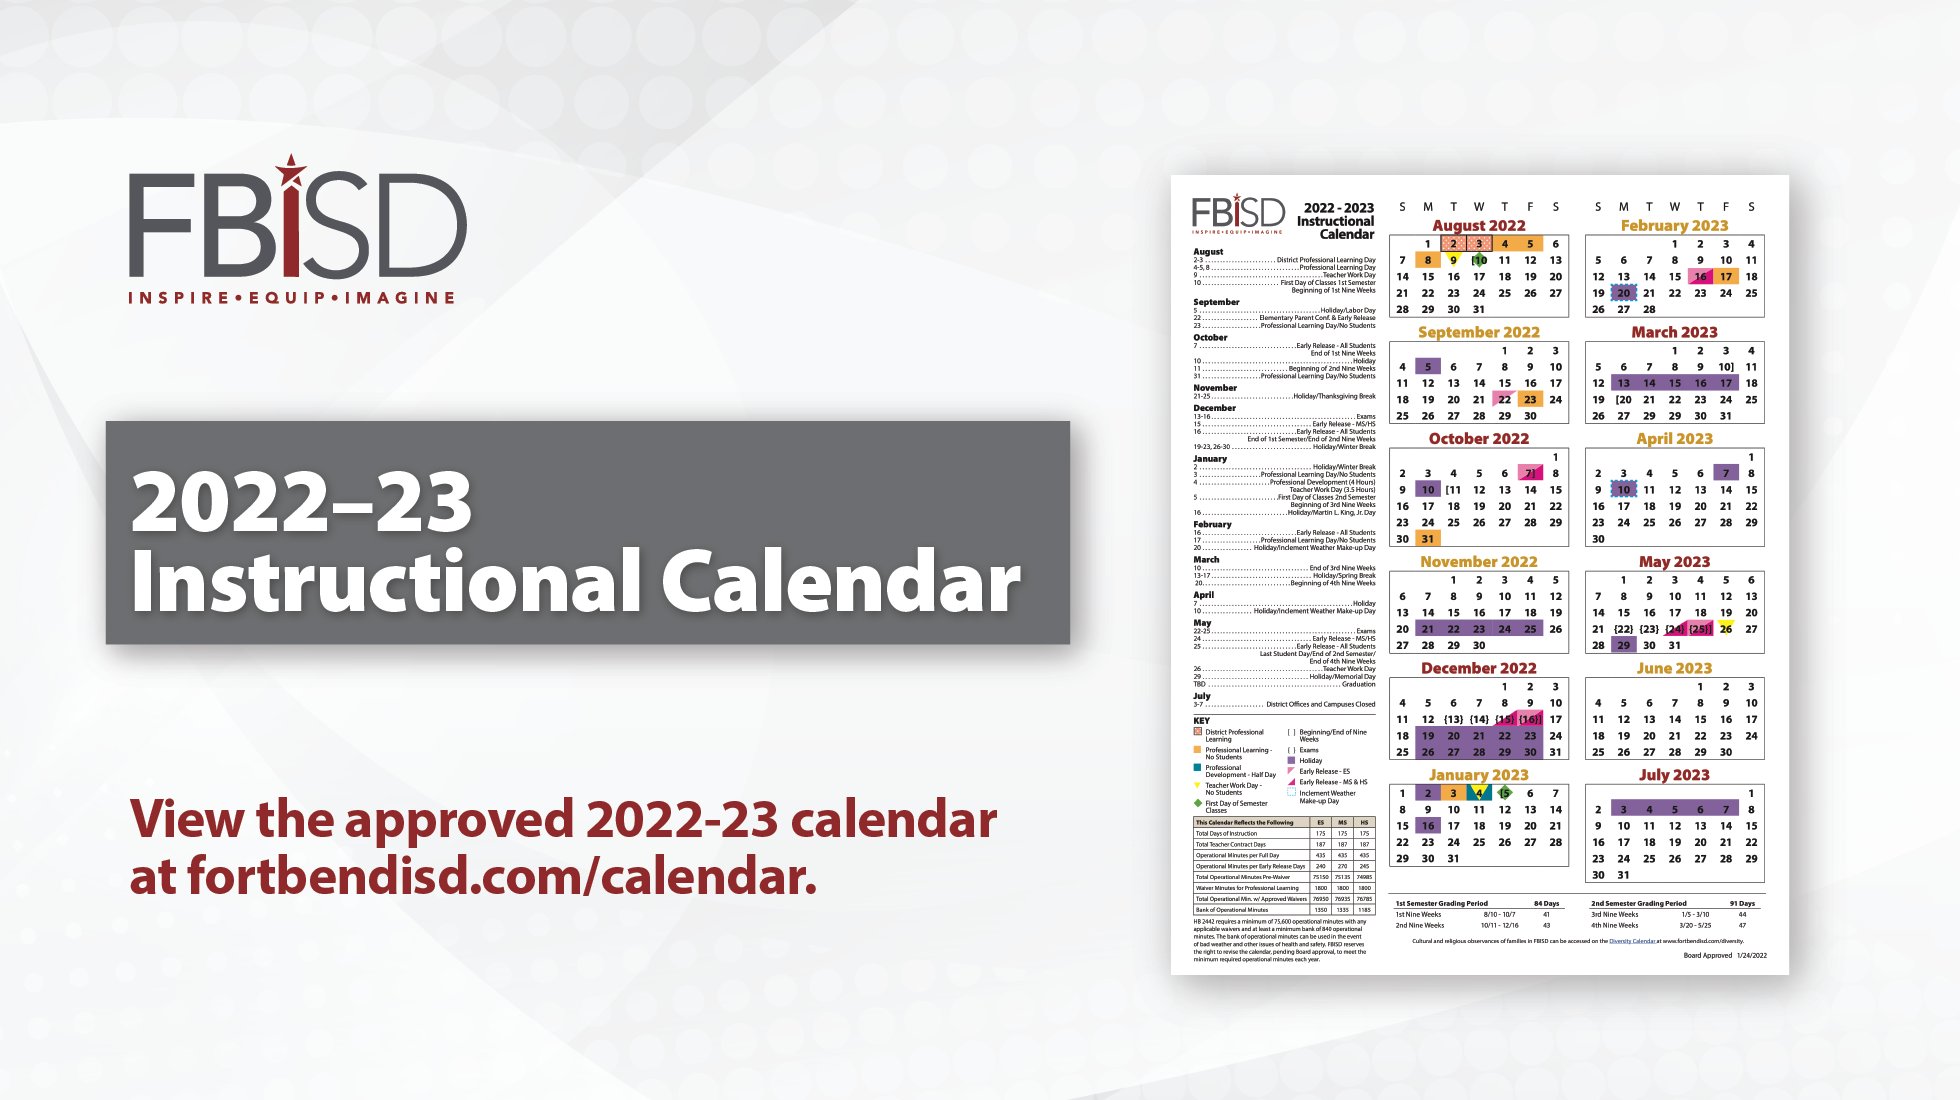 Fort Bend Isd Calendar 2022 2023 Fort Bend Isd On Twitter: "The 2022-23 Instructional Calendar Has Been  Approved By The Fort Bend Isd Board Of Trustees. 📅 View The Approved  2022-23 Calendar At Https://T.co/Sussnjxanh. Https://T.co/Y4Gaewjwxc" /  Twitter